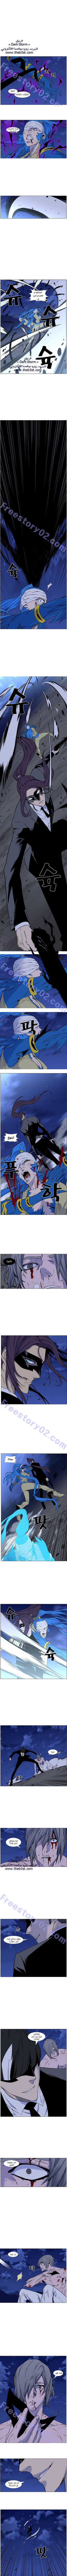 Noblesse: Chapter 454 - Page 1